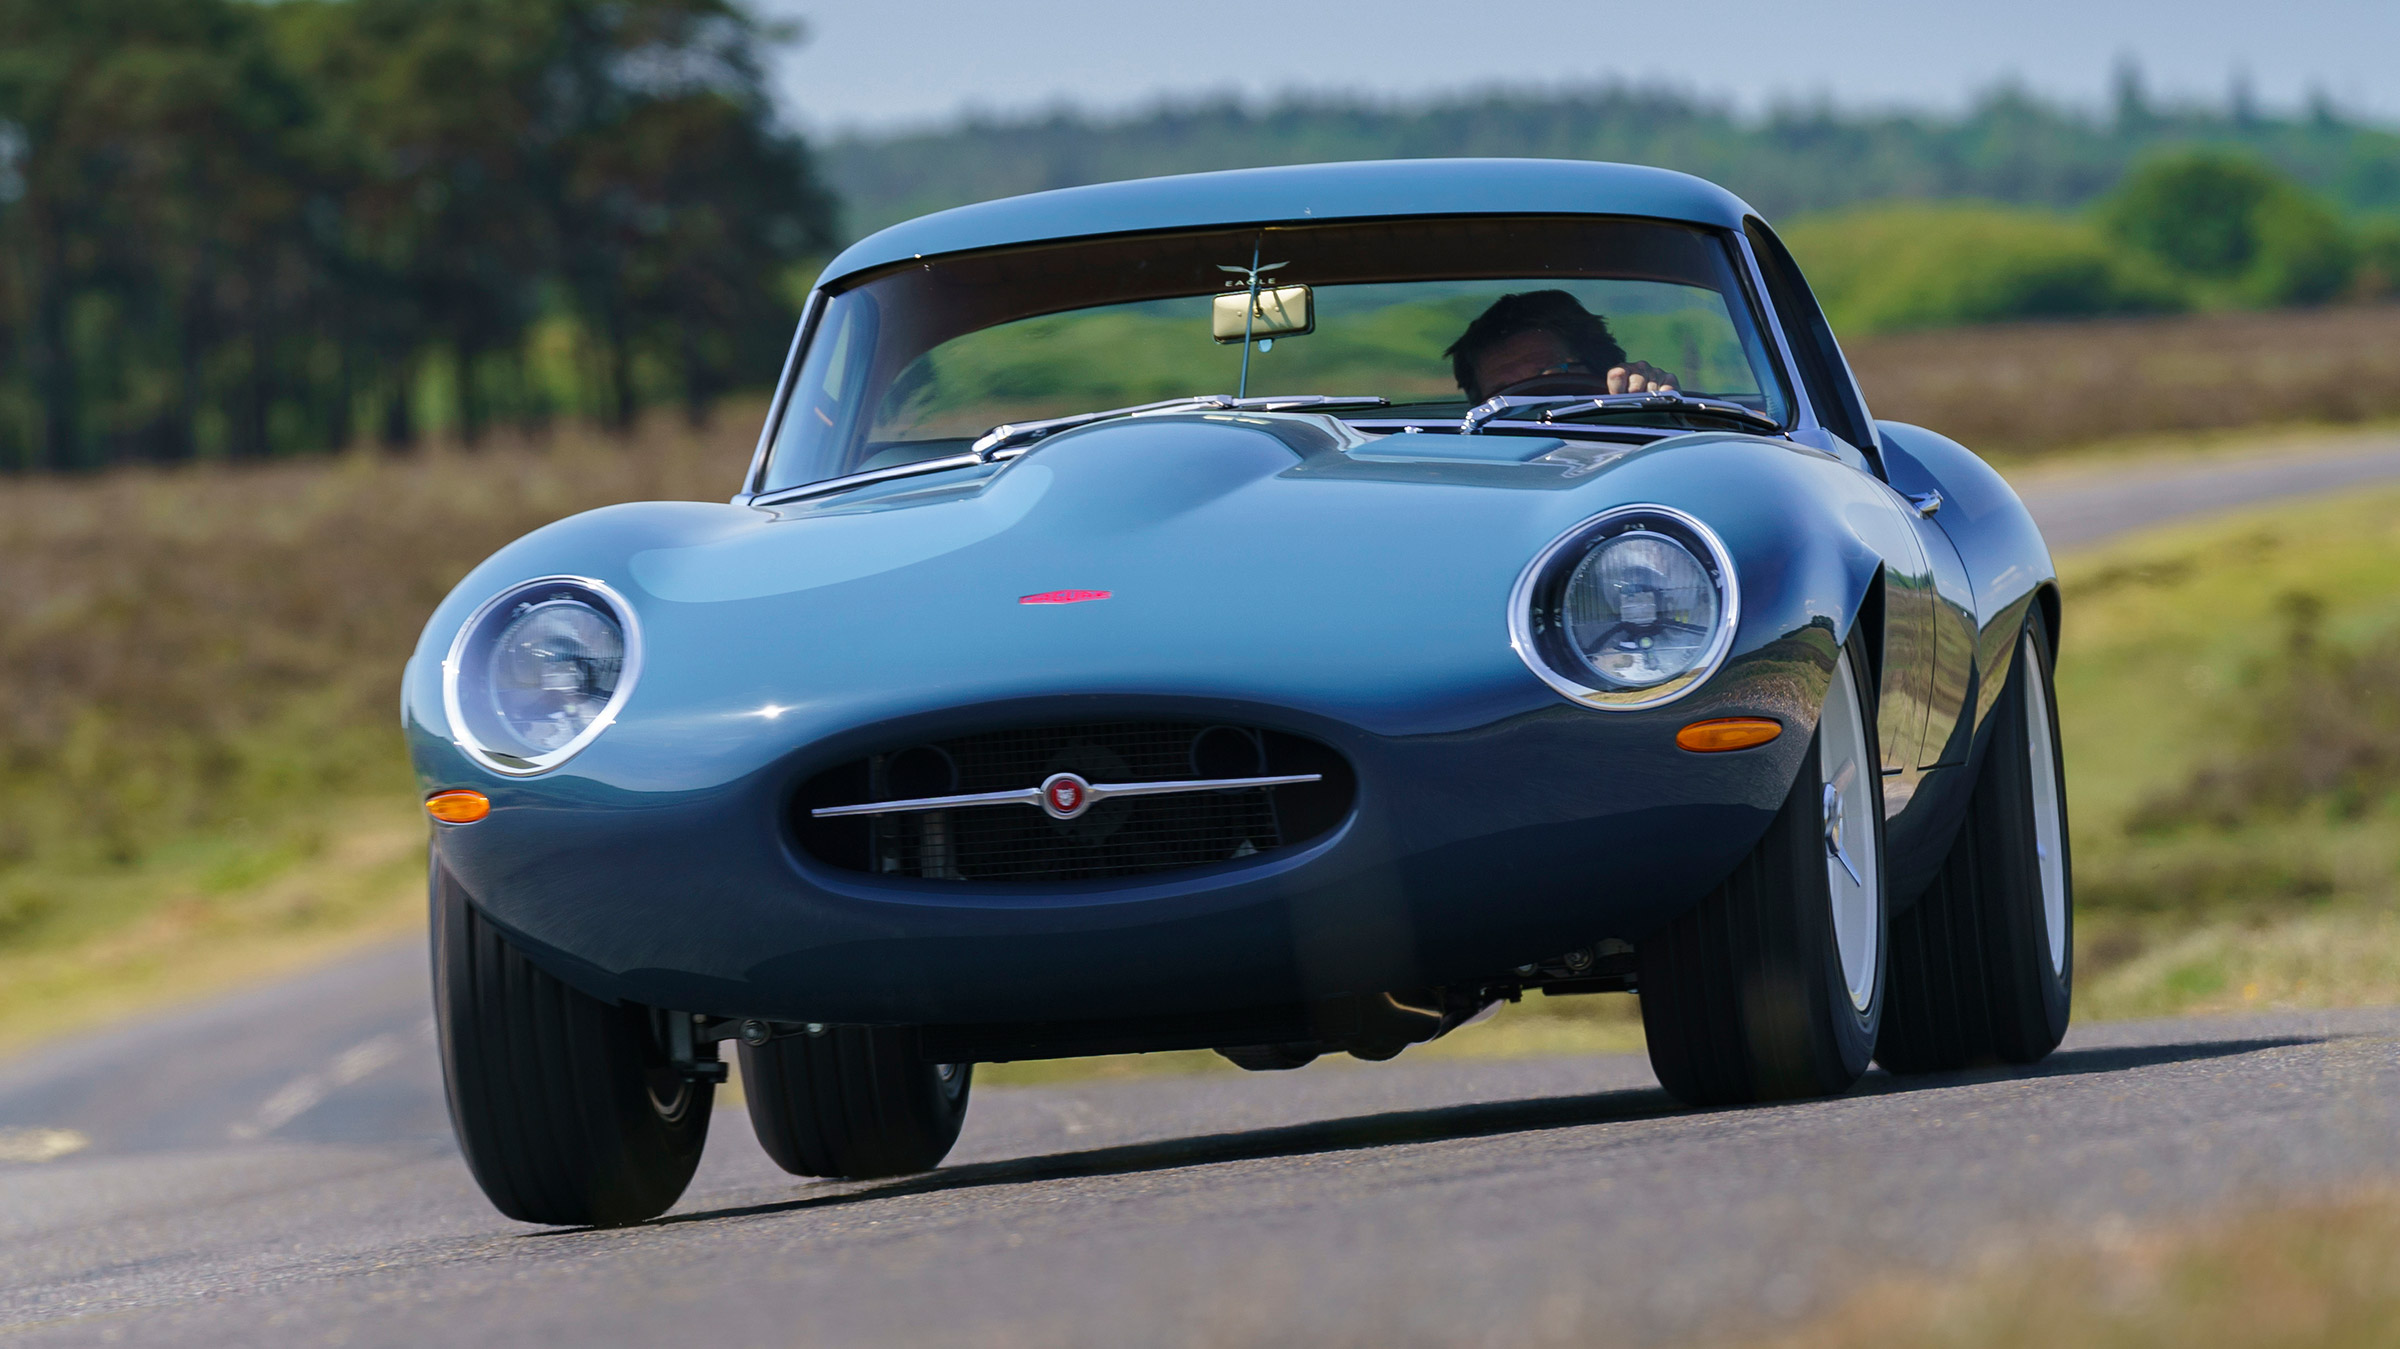 New Eagle E-Type Lightweight GT pays tribute to iconic 